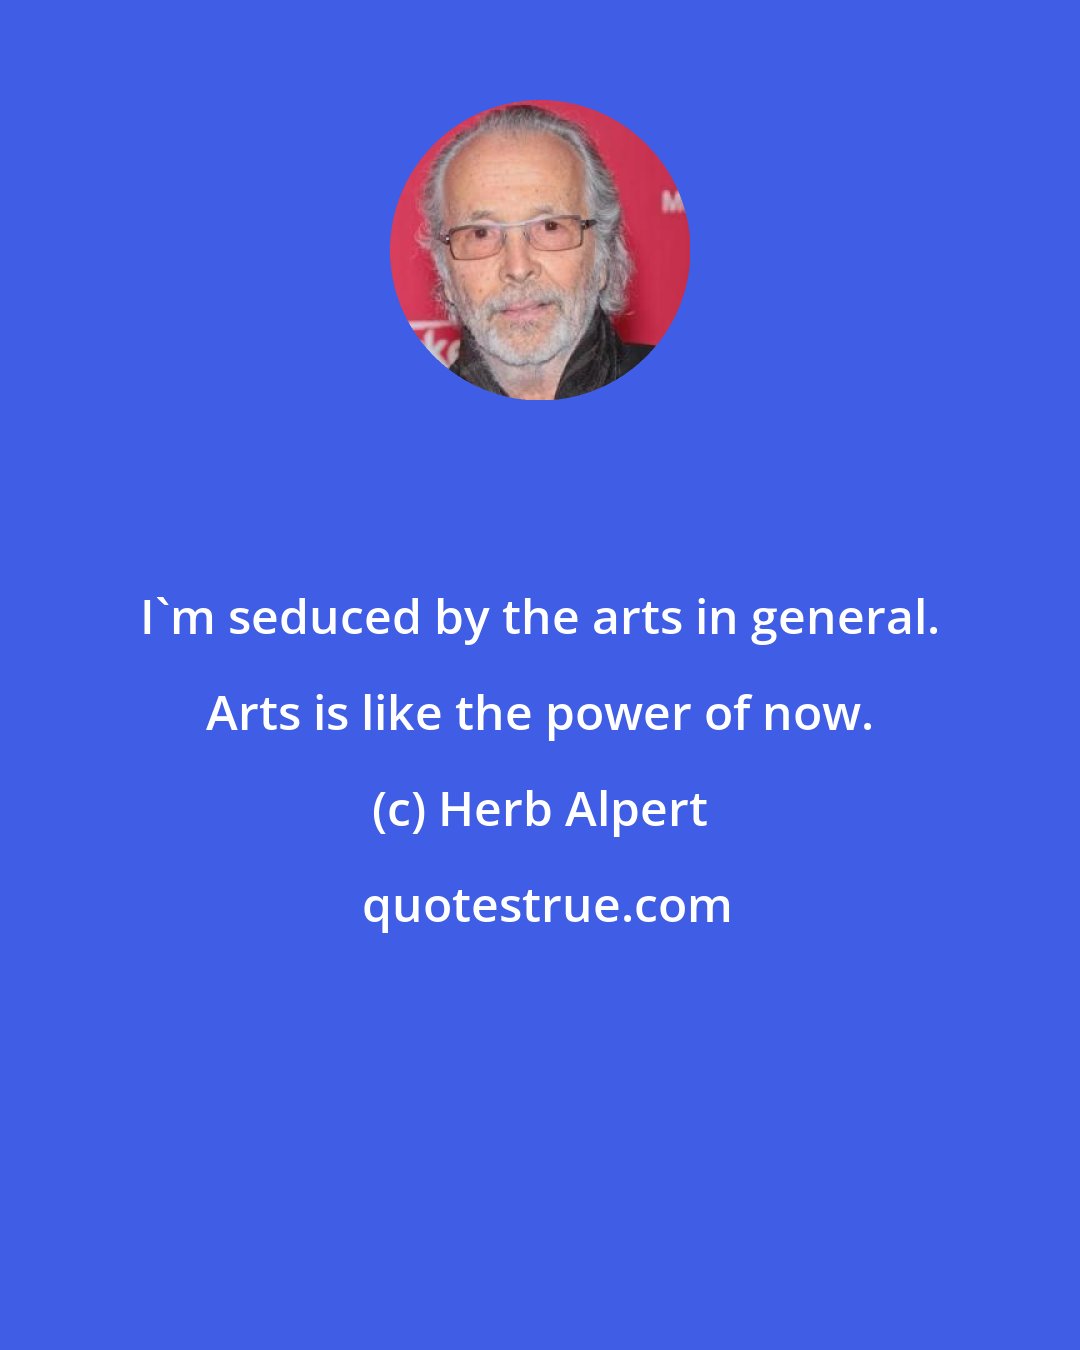 Herb Alpert: I'm seduced by the arts in general. Arts is like the power of now.